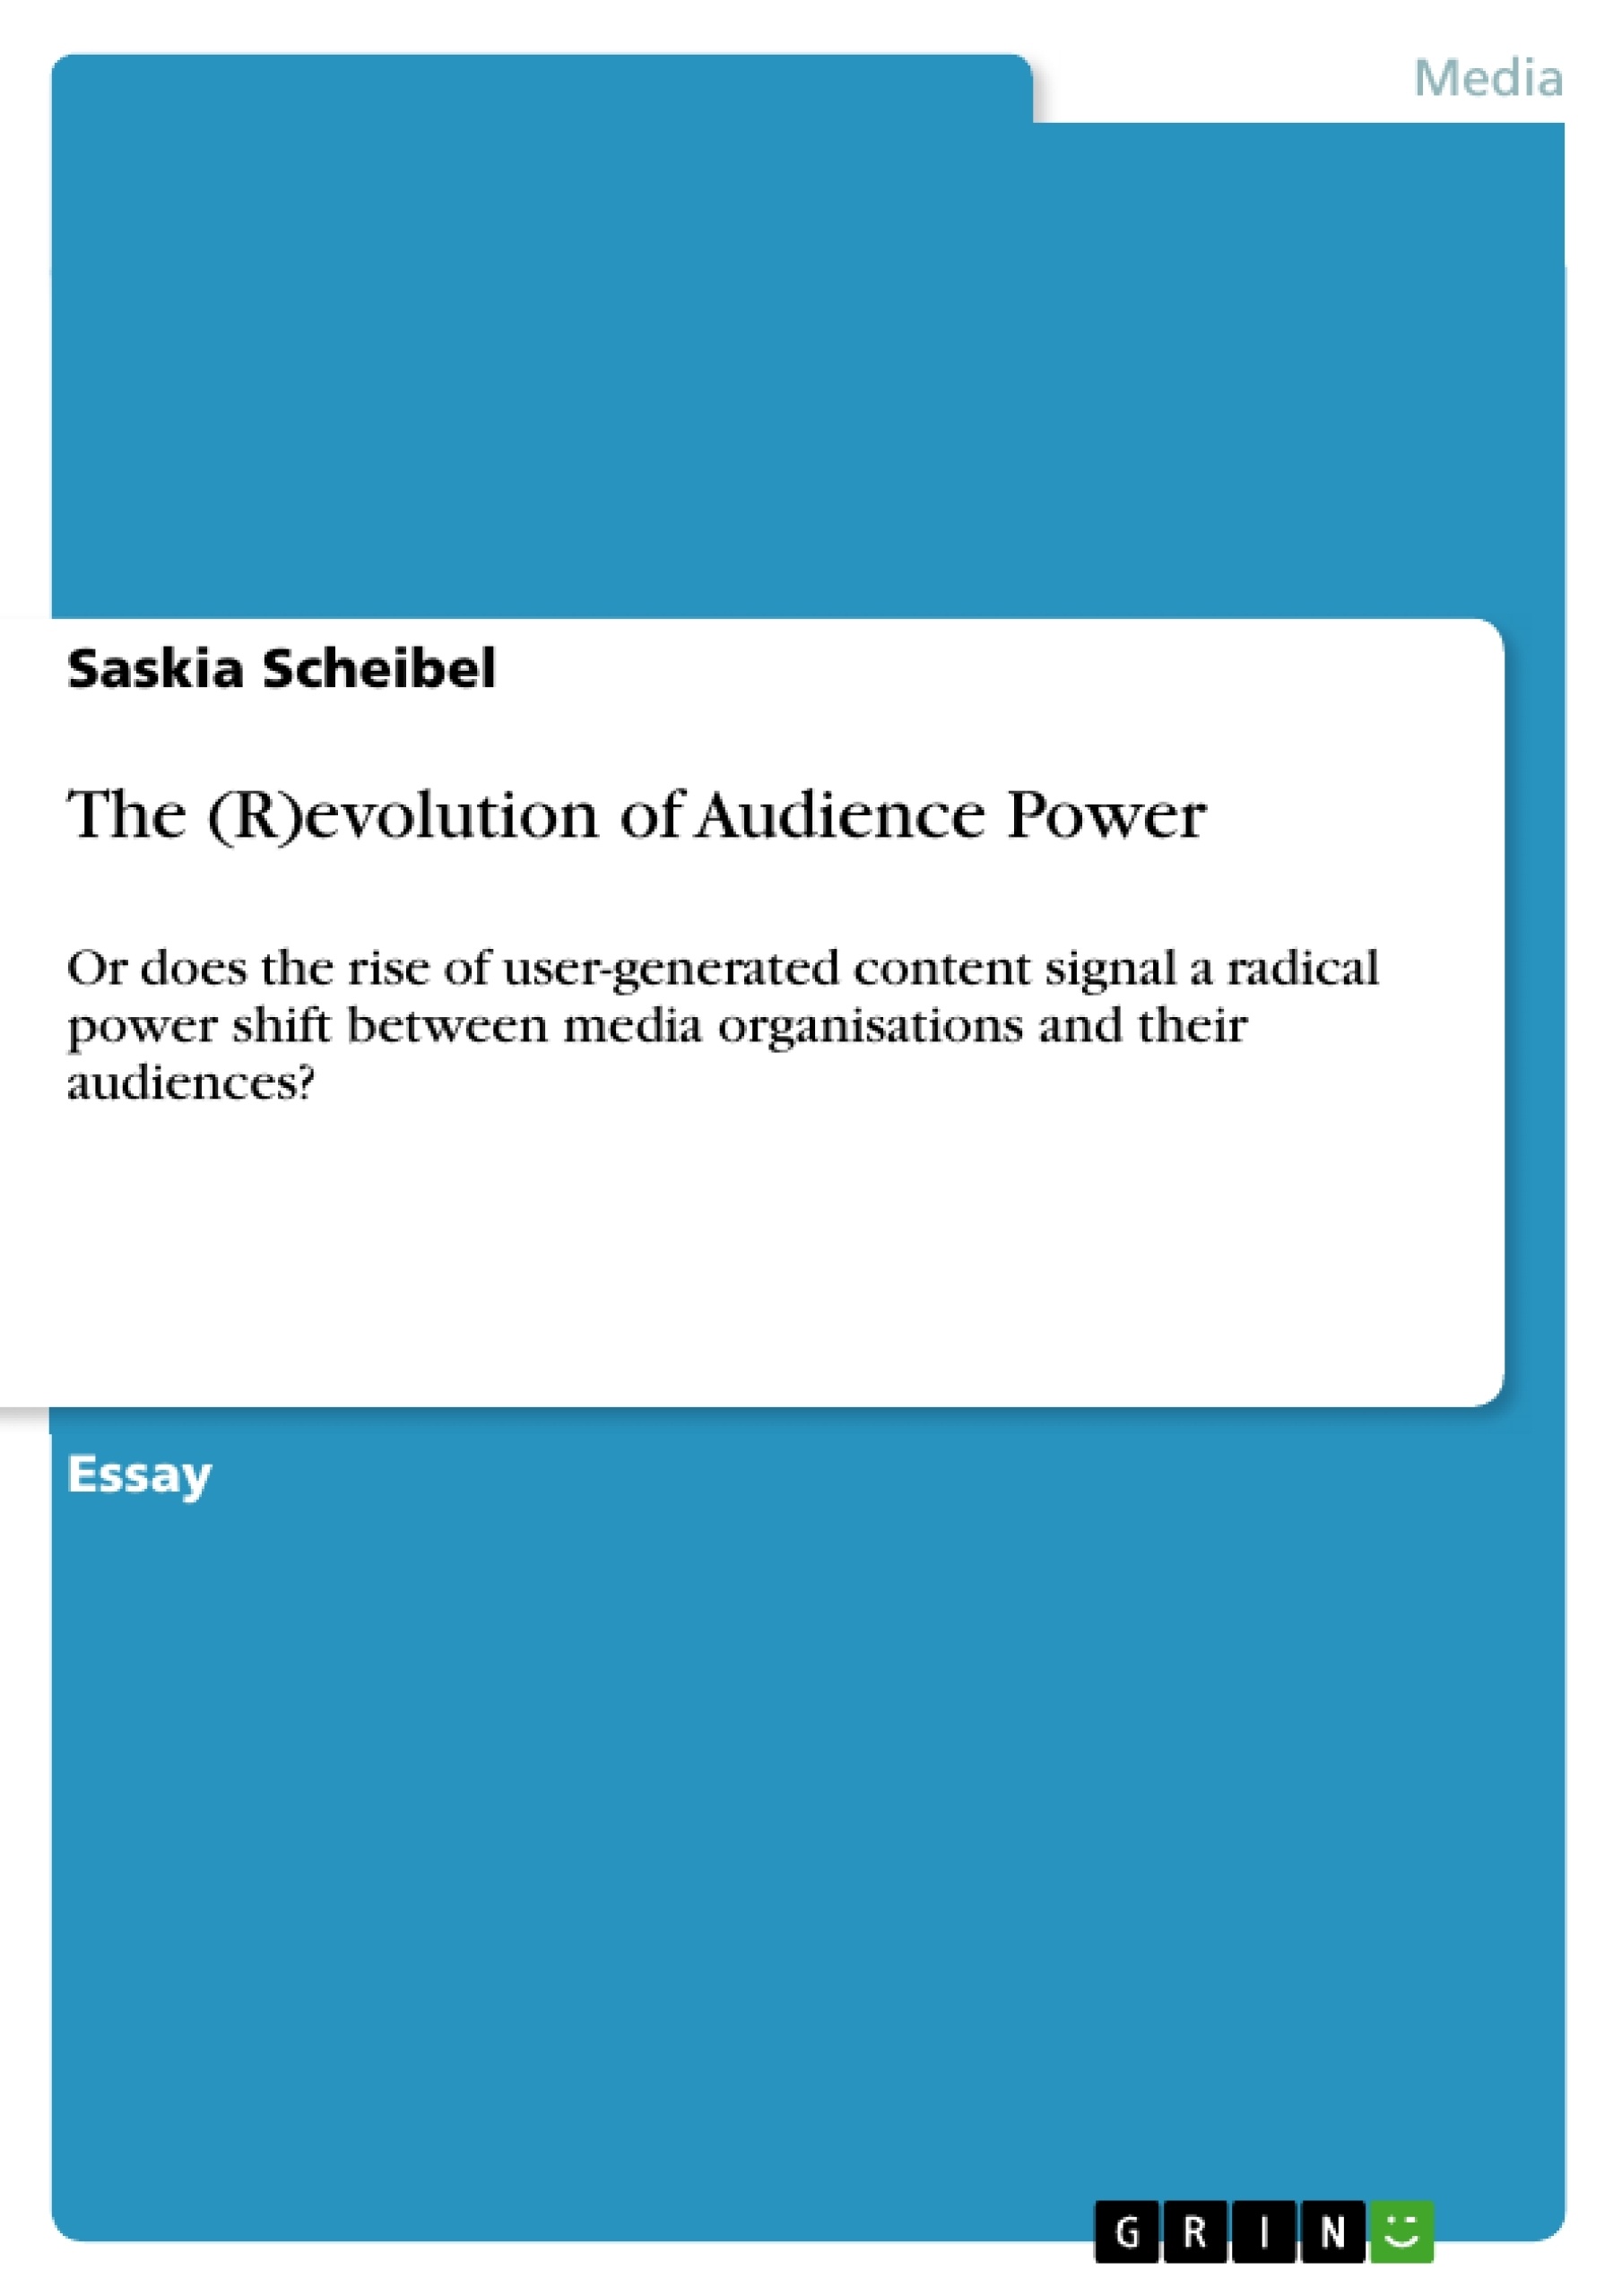 Título: The (R)evolution of Audience Power